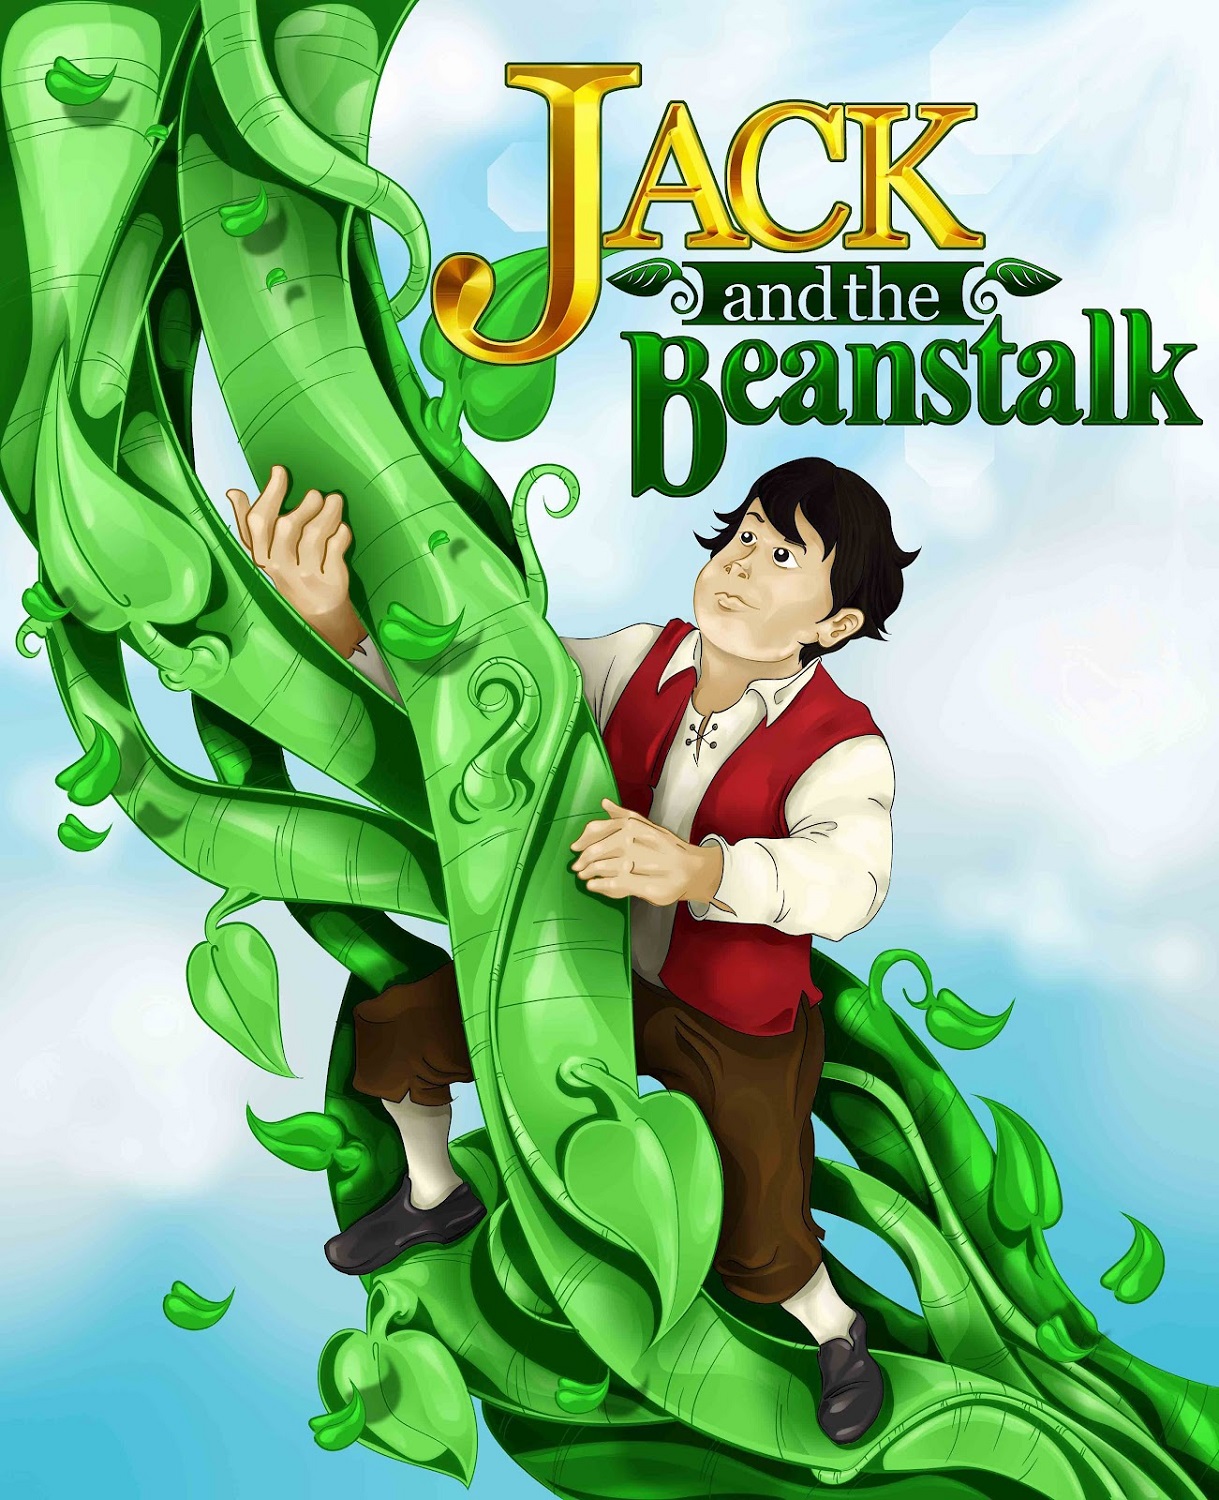 jack-and-the-beanstalk-images-story